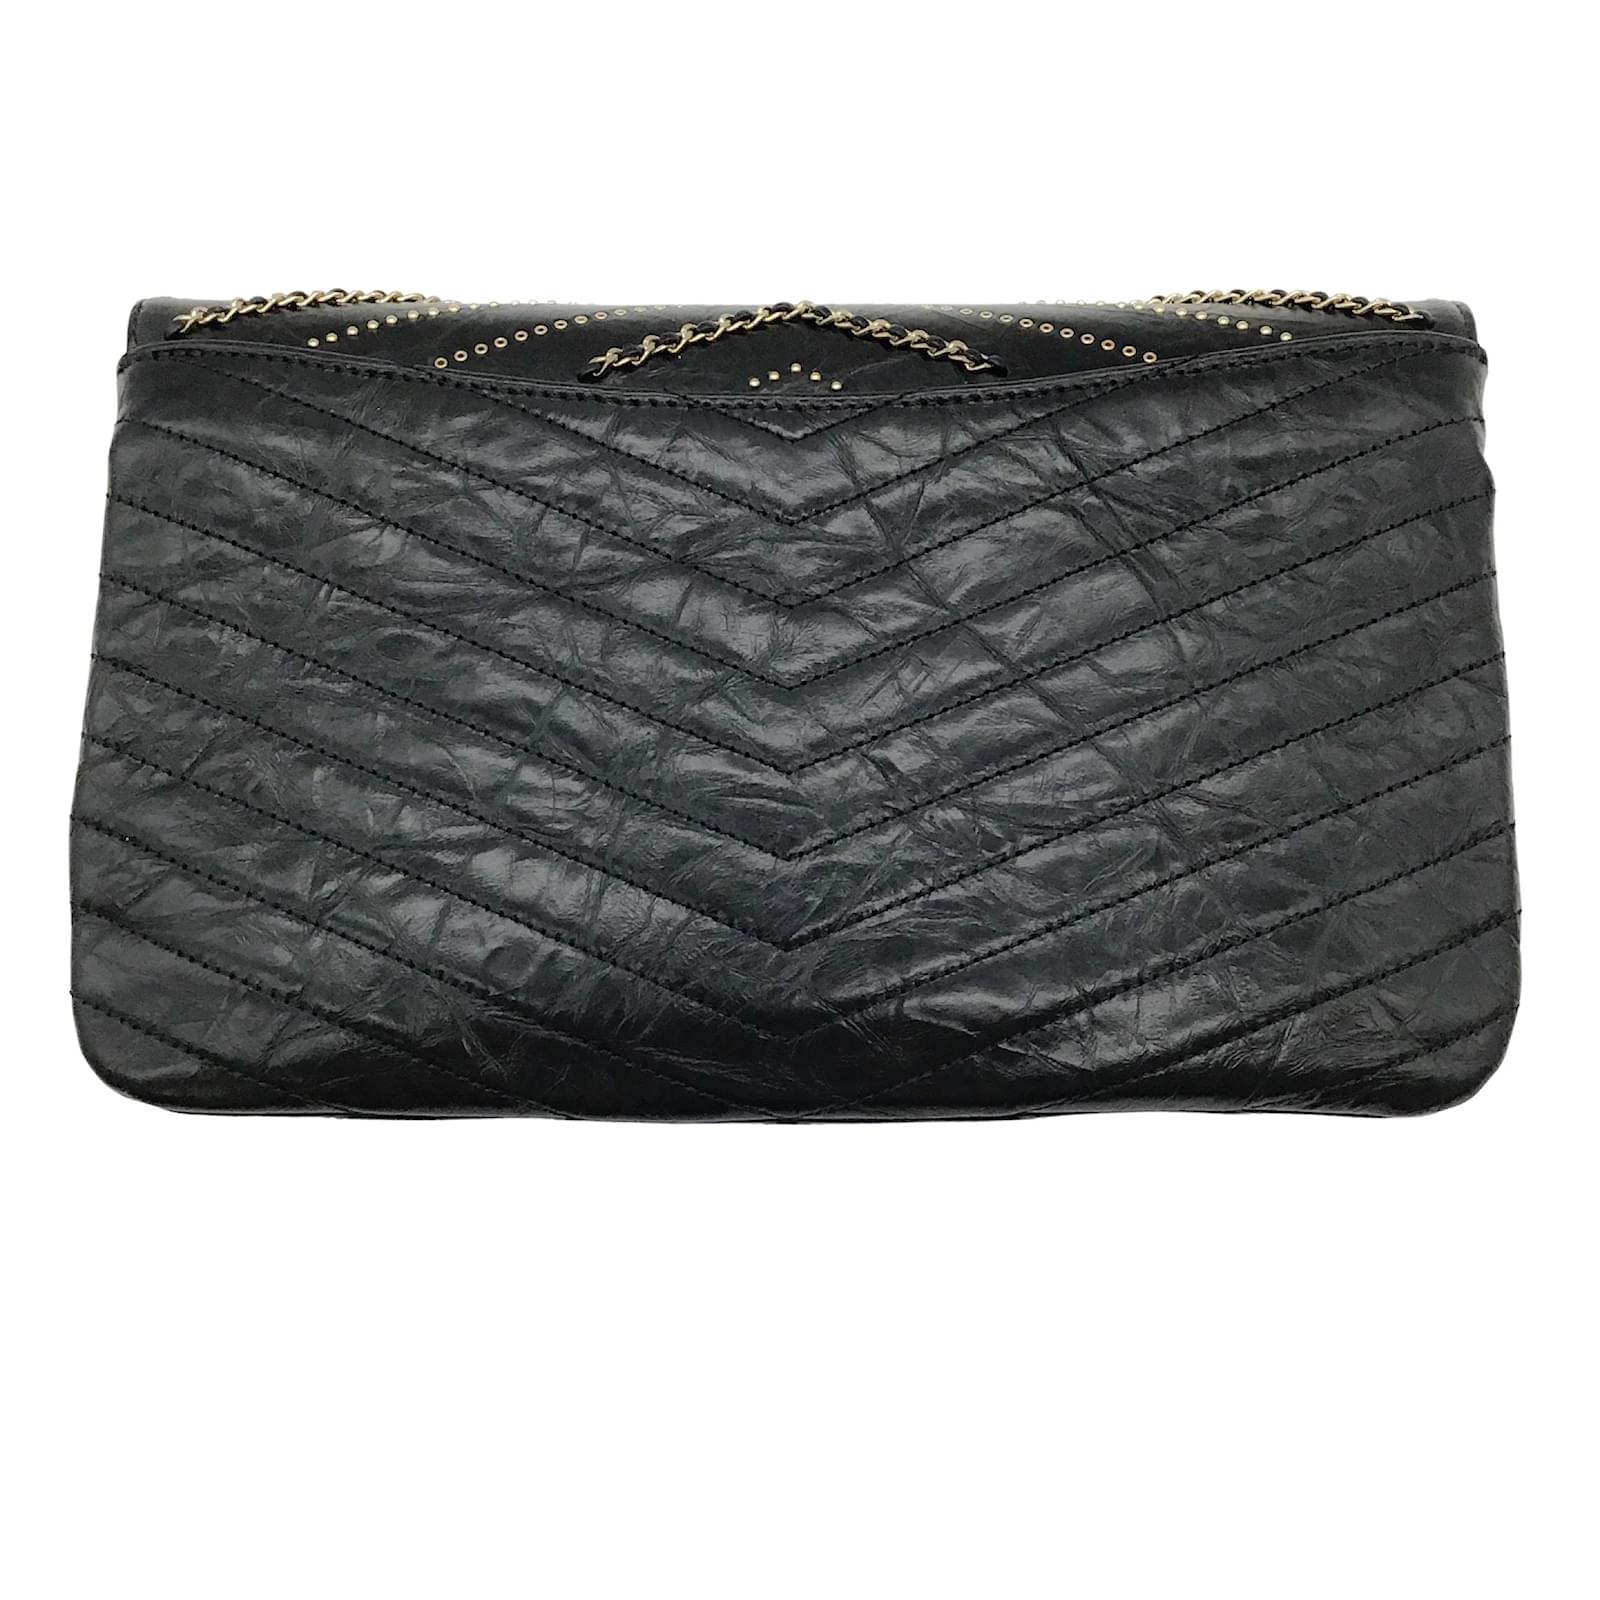 Chanel Authenticated Leather Clutch Bag